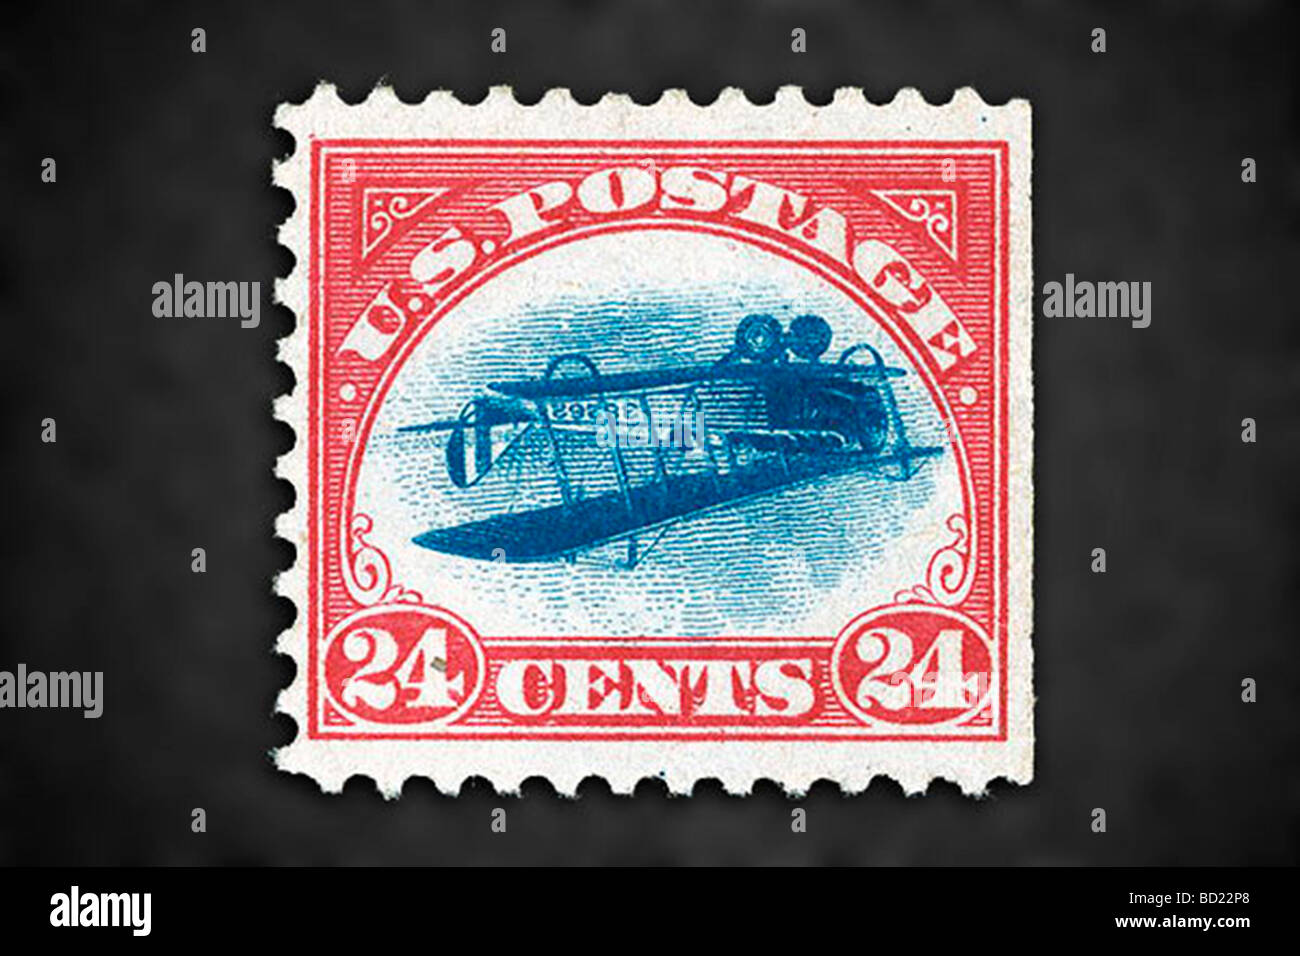 rare 1918 Inverted airmail postage stamp United States Stock Photo